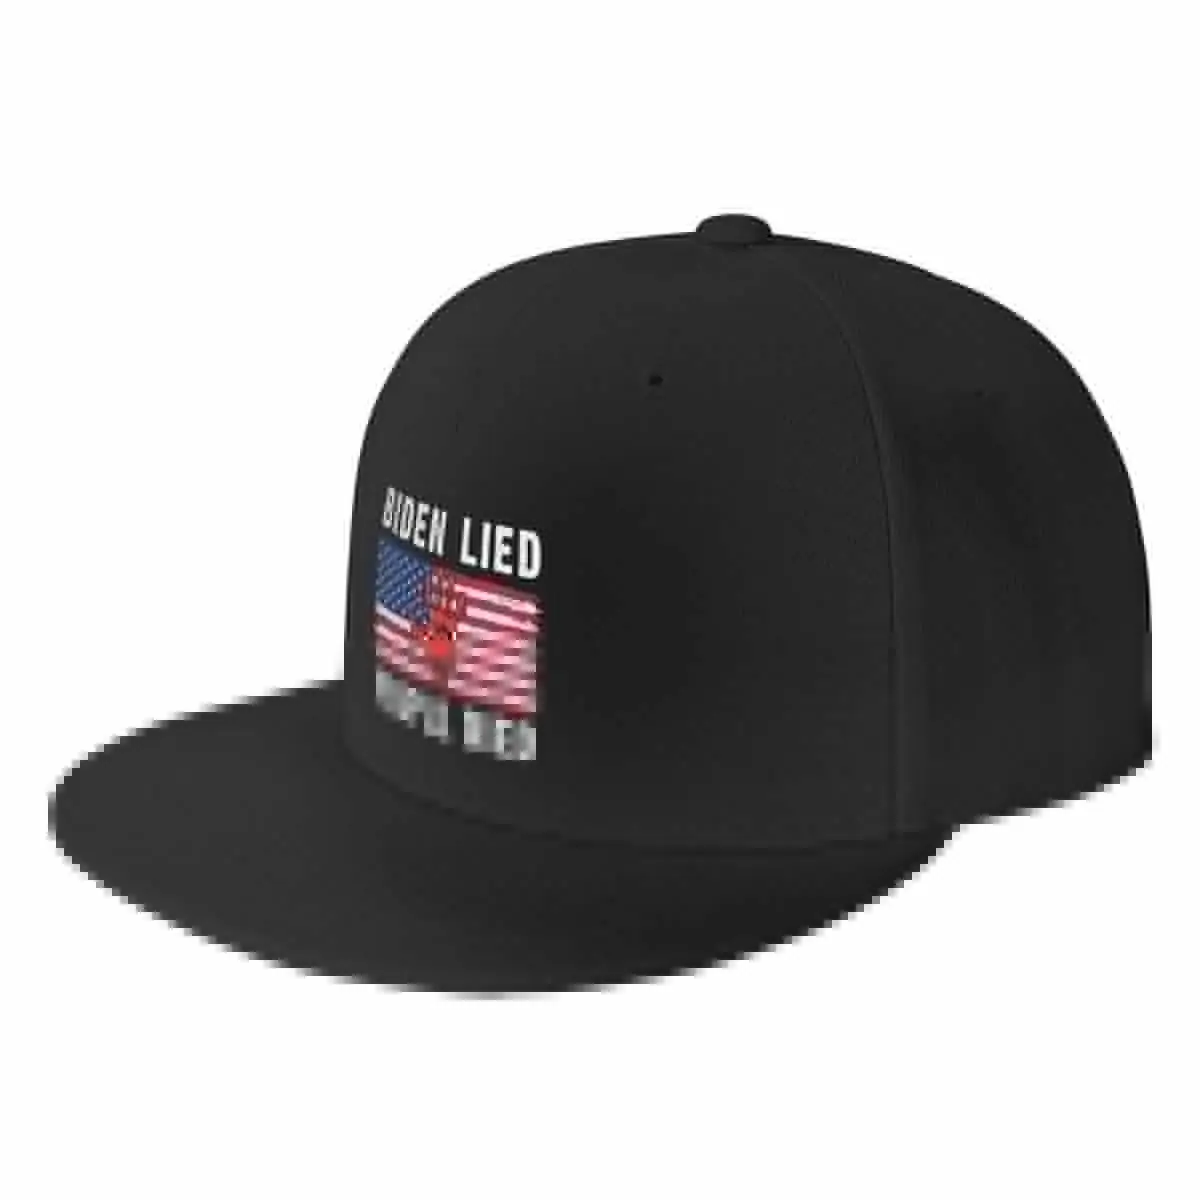 Ied people died usa flag impeach biden now hip hop hat christmas hats military tactical thumb200